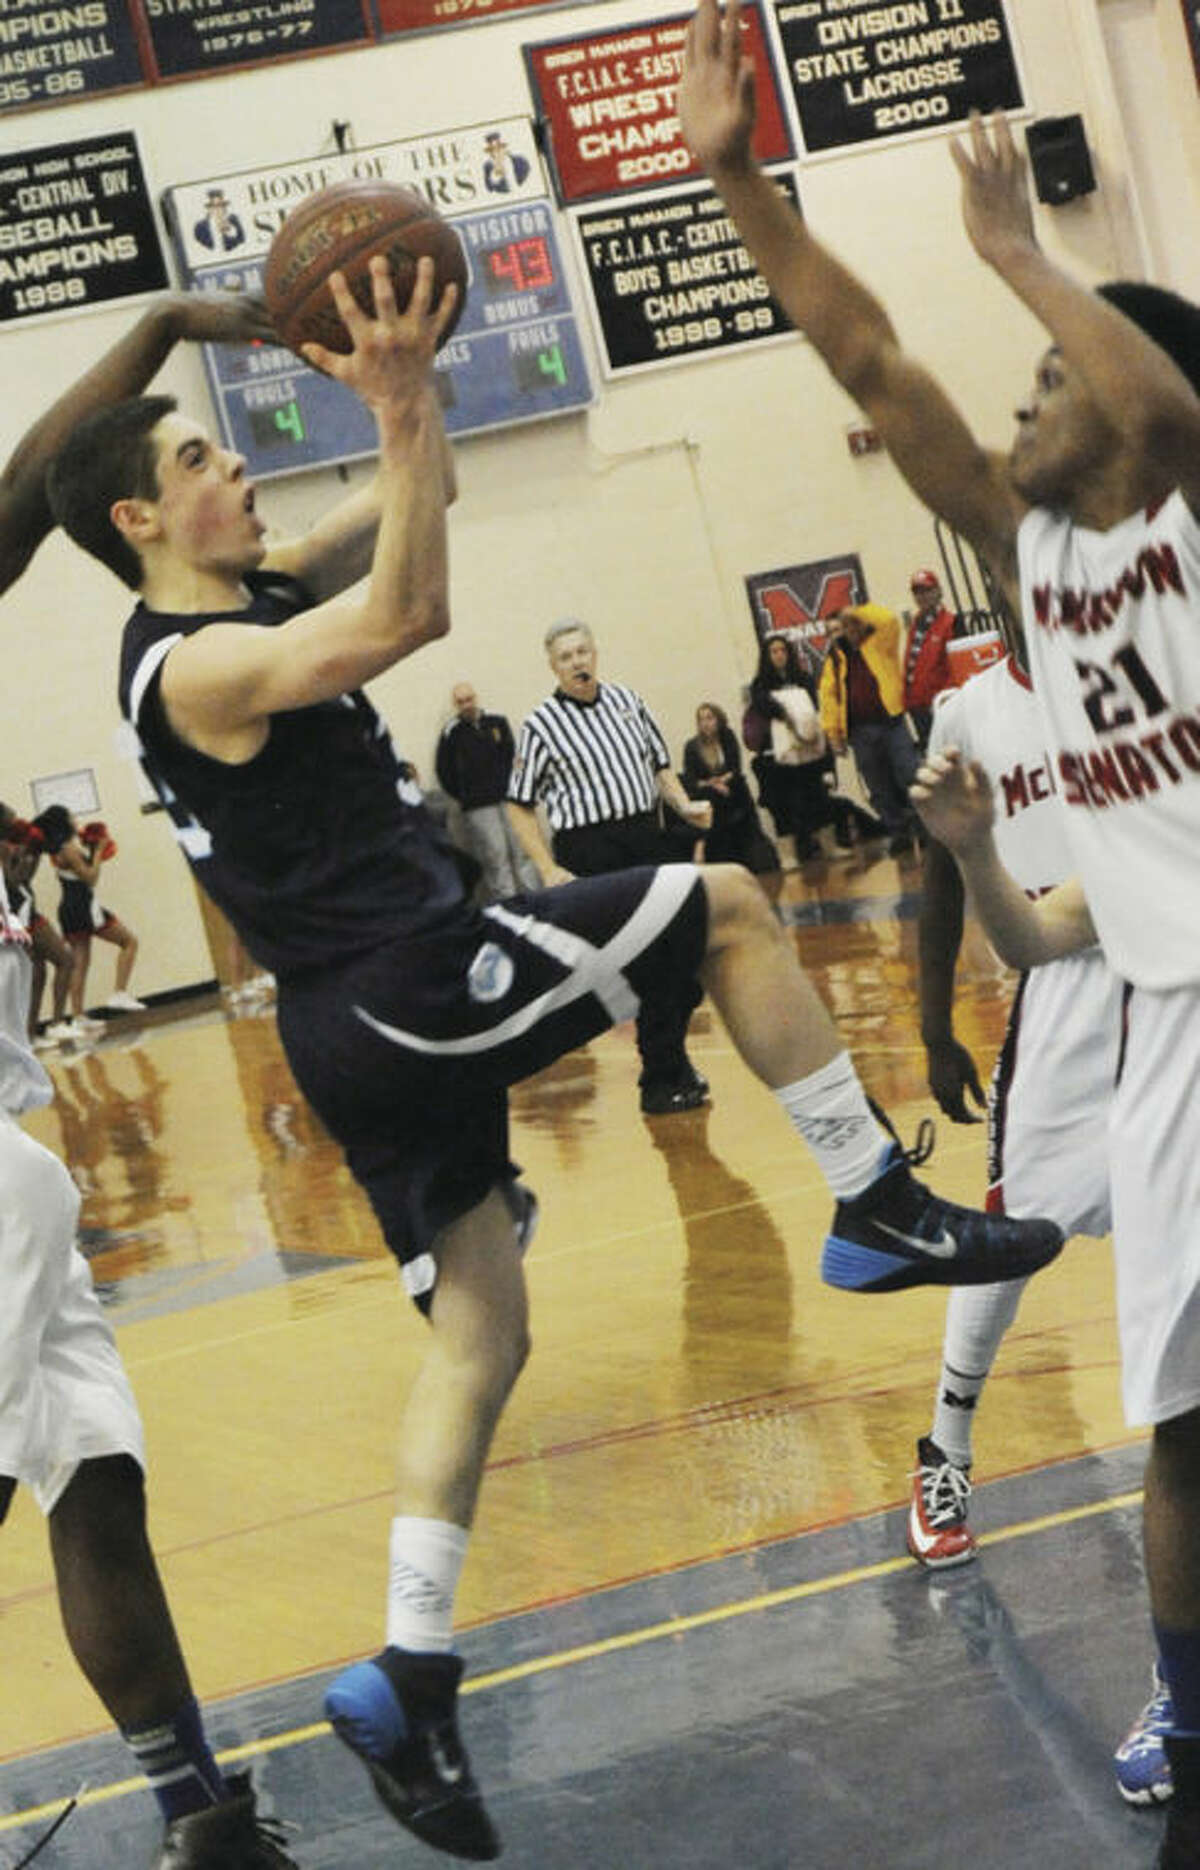 Hour photo/Matthew Vinci Wilton's Matt Shifrin, left, goes up for a shot over Timothy Hinton Jr. of Brien McMahon during Tuesday night's game.